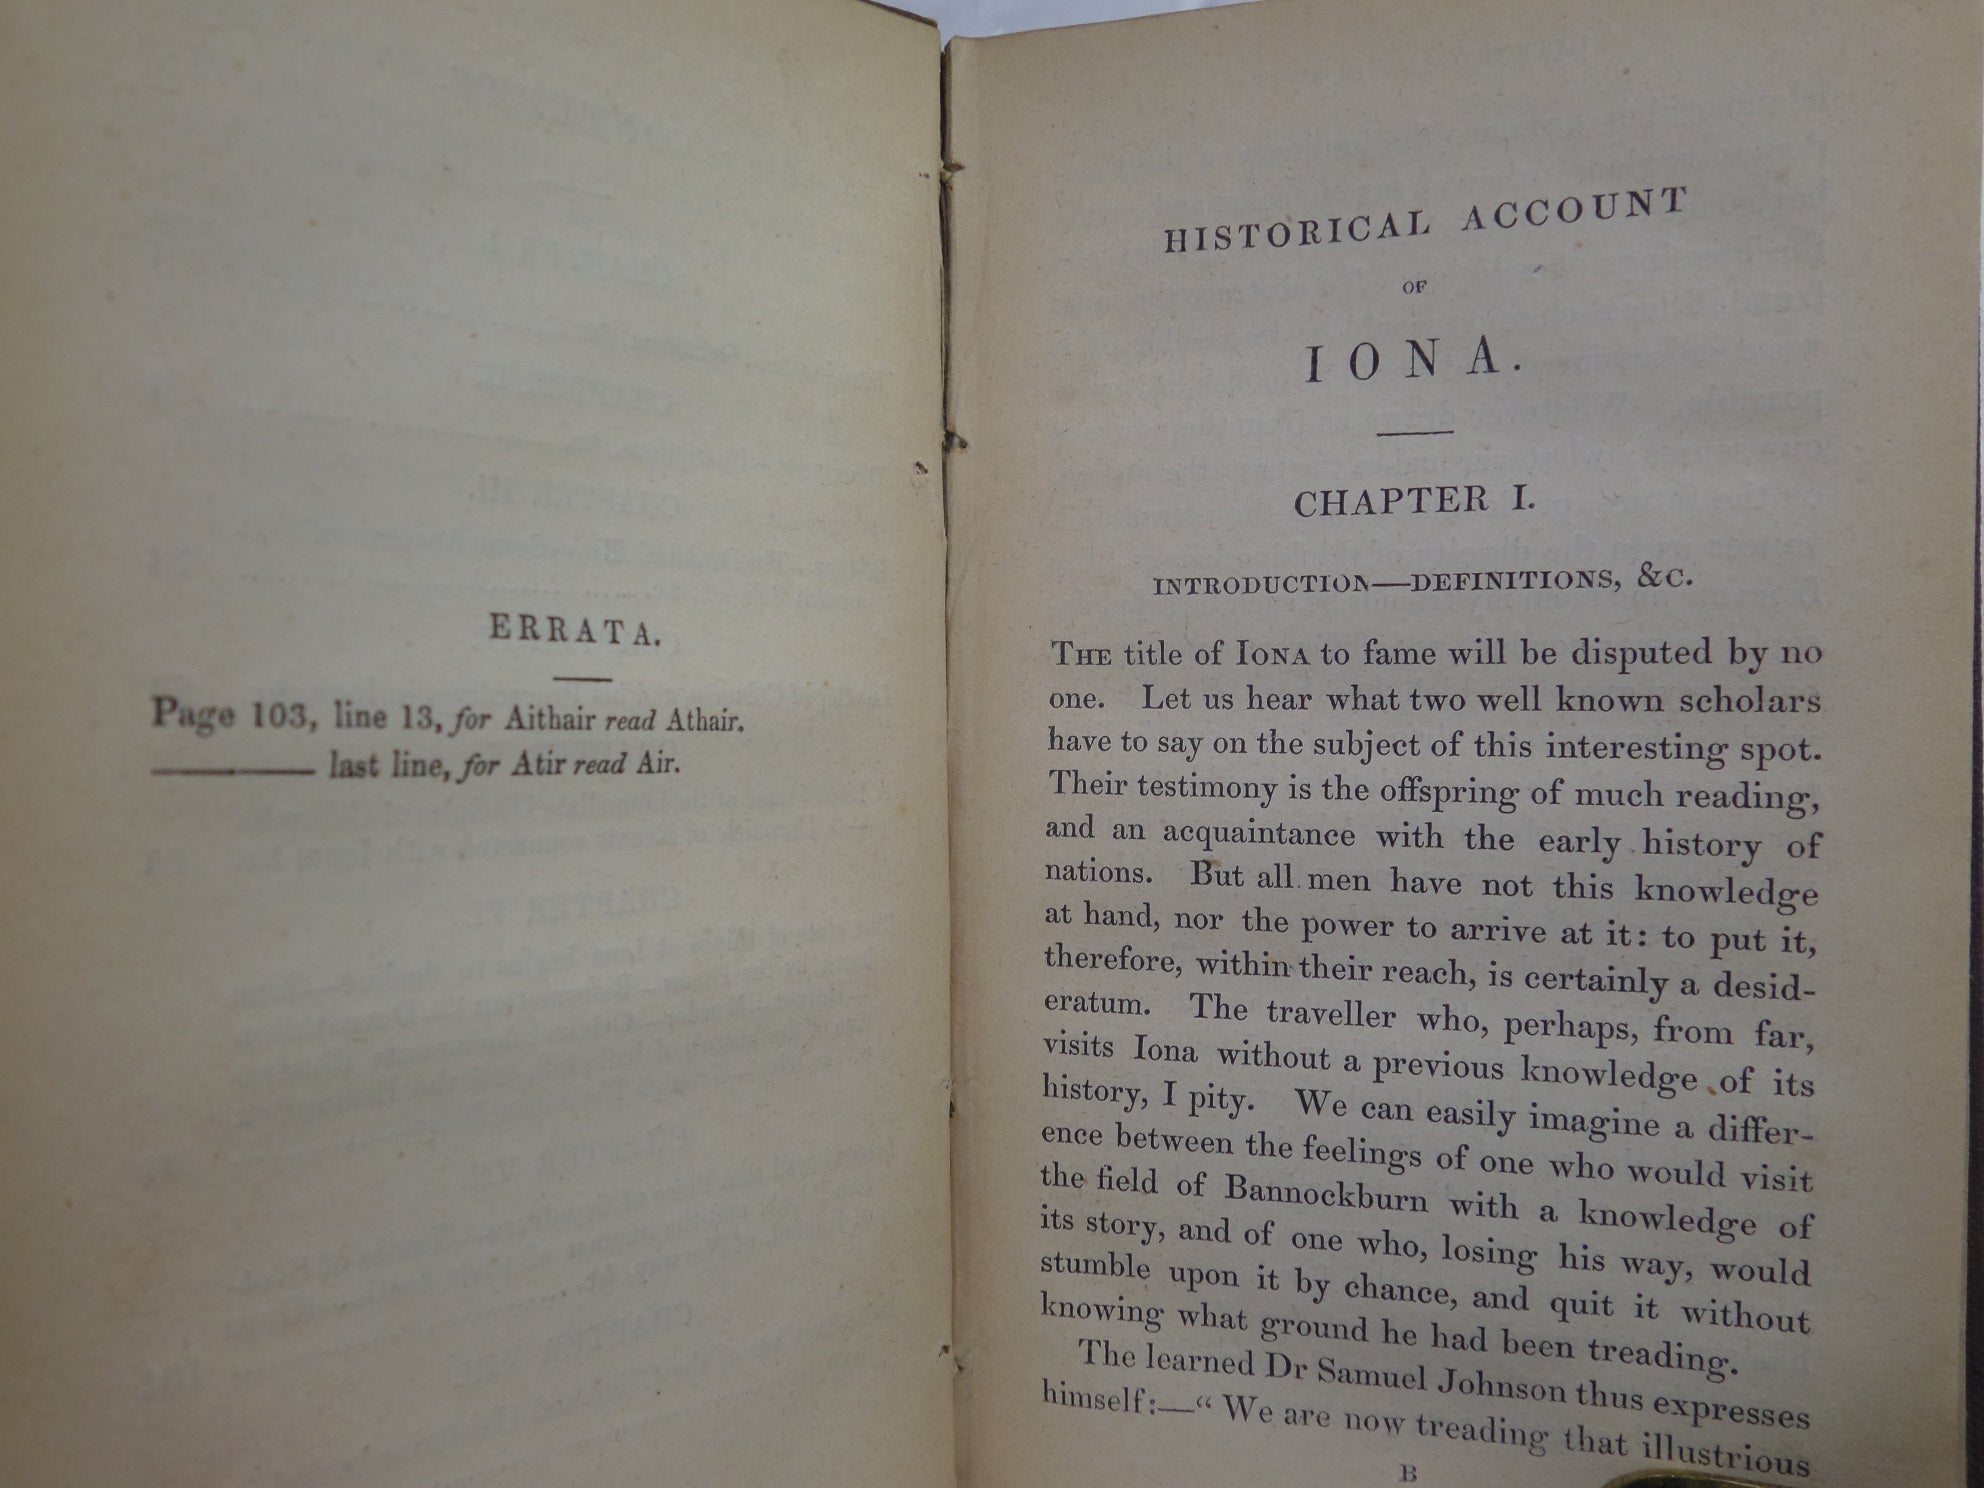 AN HISTORICAL ACCOUNT OF IONA BY L. MACLEAN 1841 FOURTH EDITION HARDCOVER